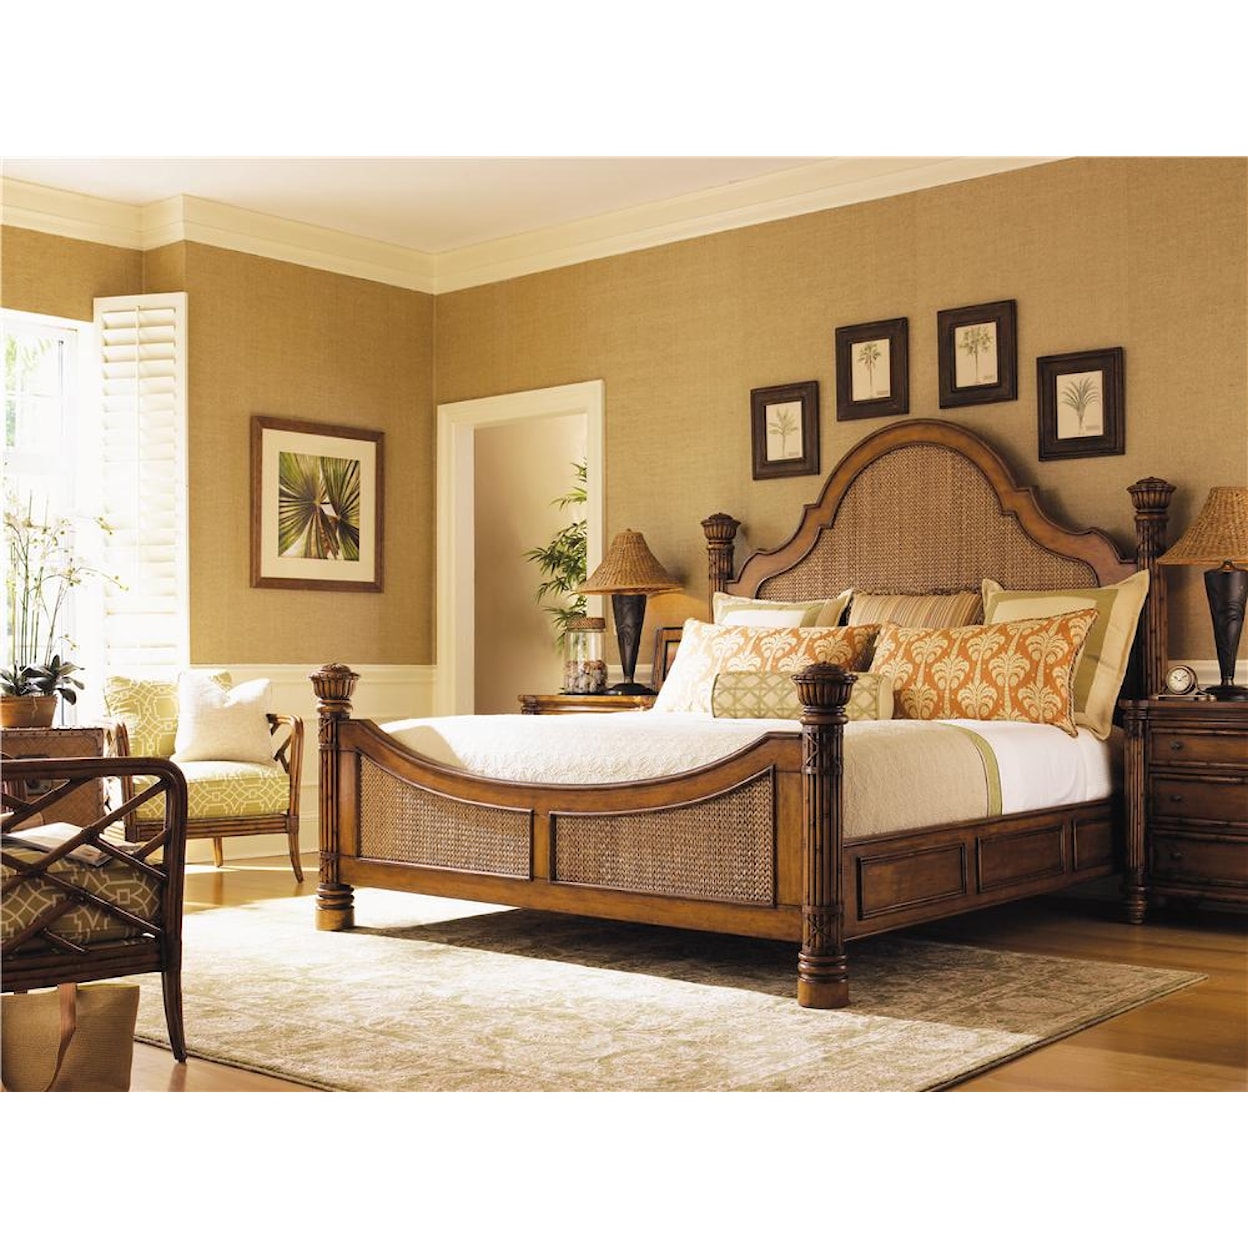 Tommy Bahama Home Island Estate California King Round Hill Bed